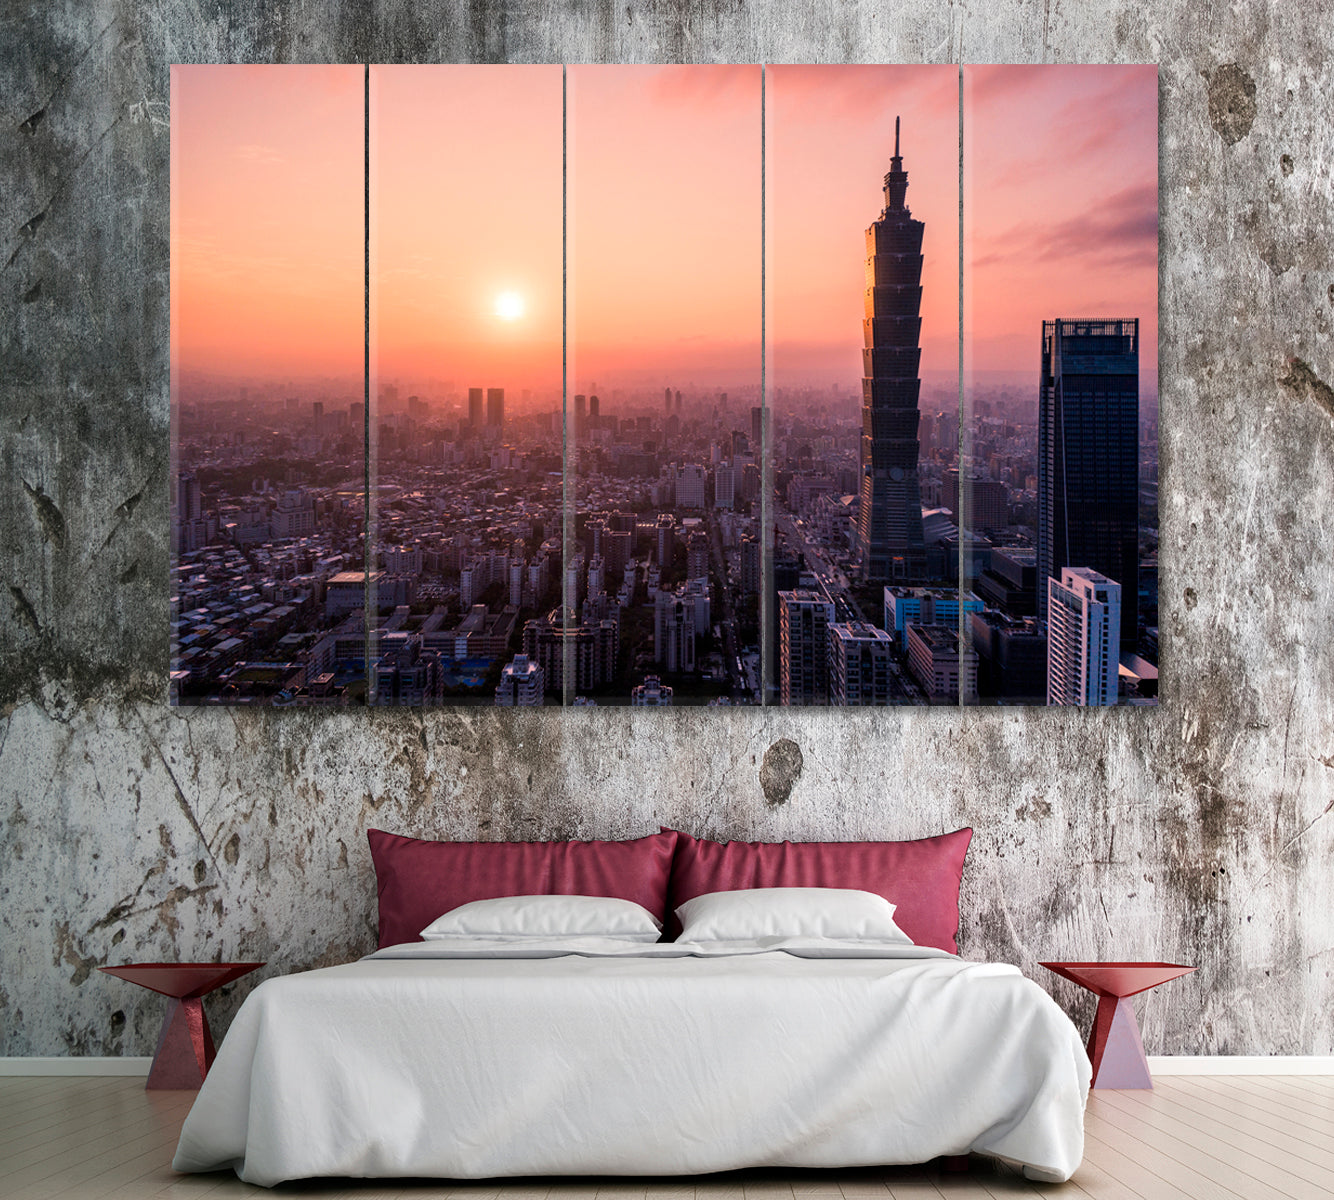 Sunset over Taipei Taiwan Canvas Print ArtLexy 5 Panels 36"x24" inches 